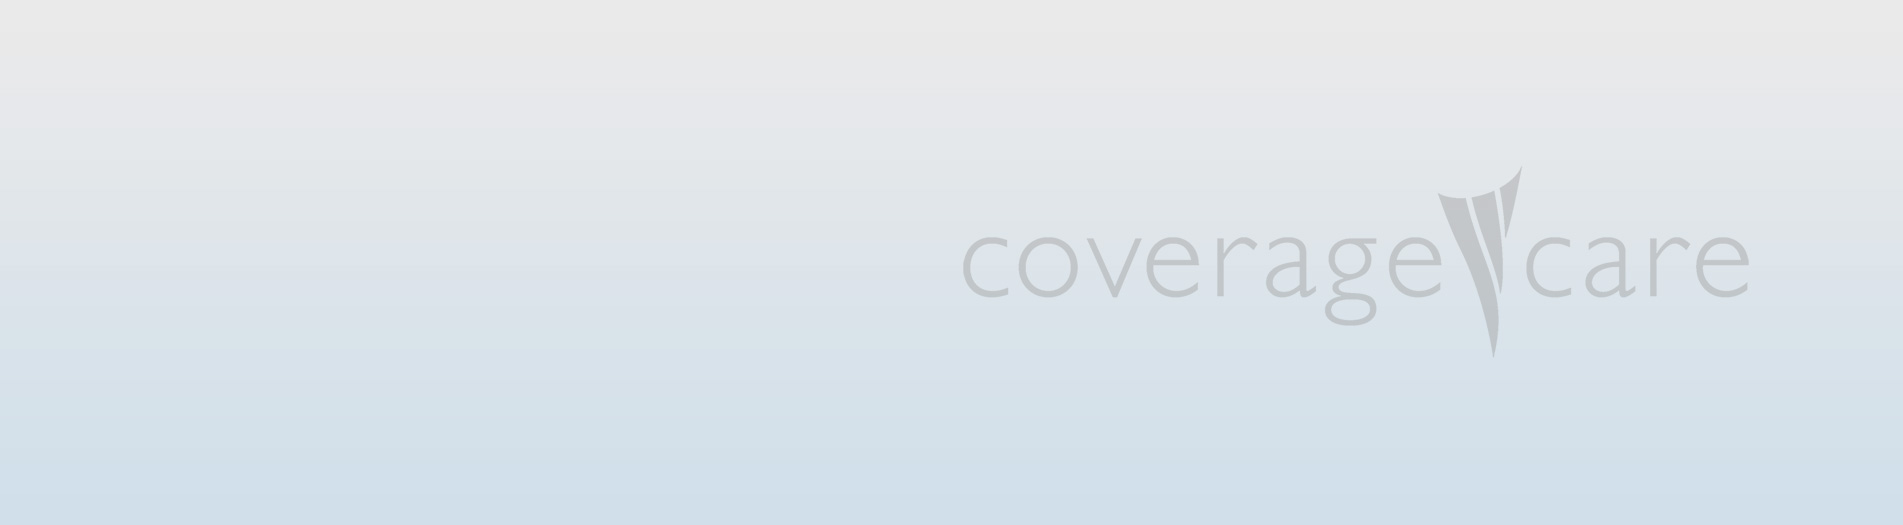 COVID - 19 Latest Updates from Coverage Care